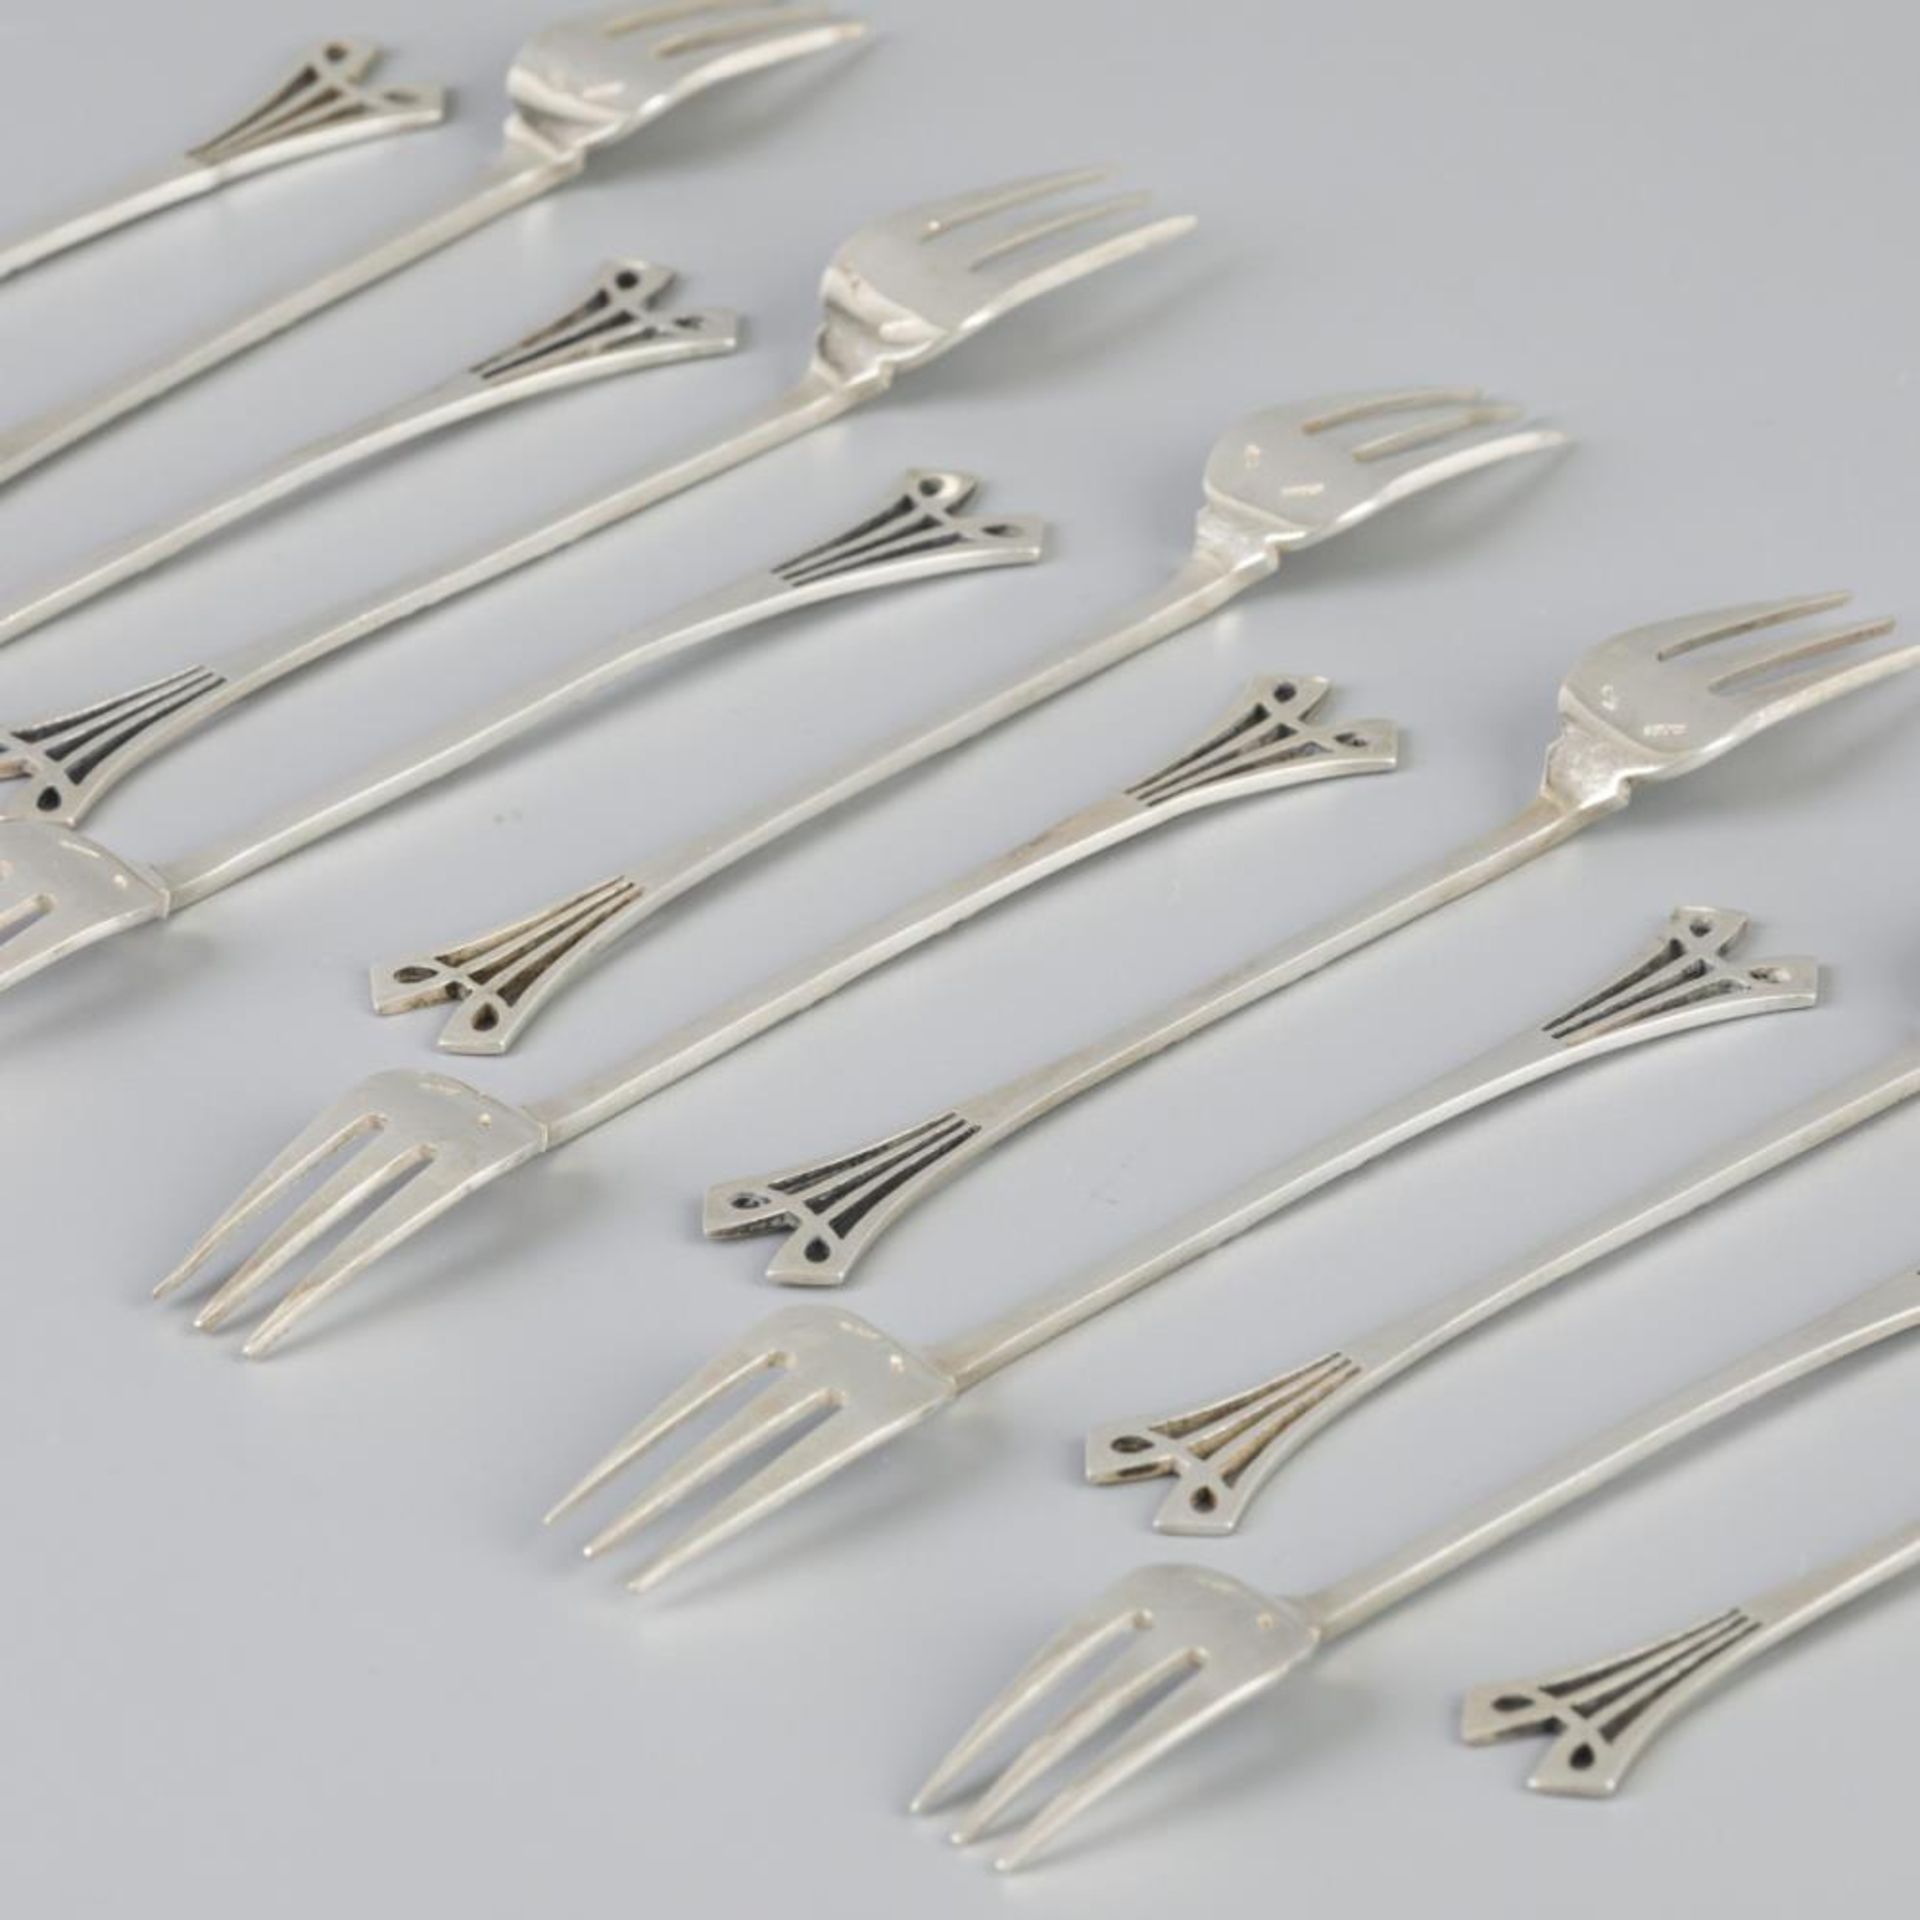 12 piece set silver pastry forks. - Image 4 of 6